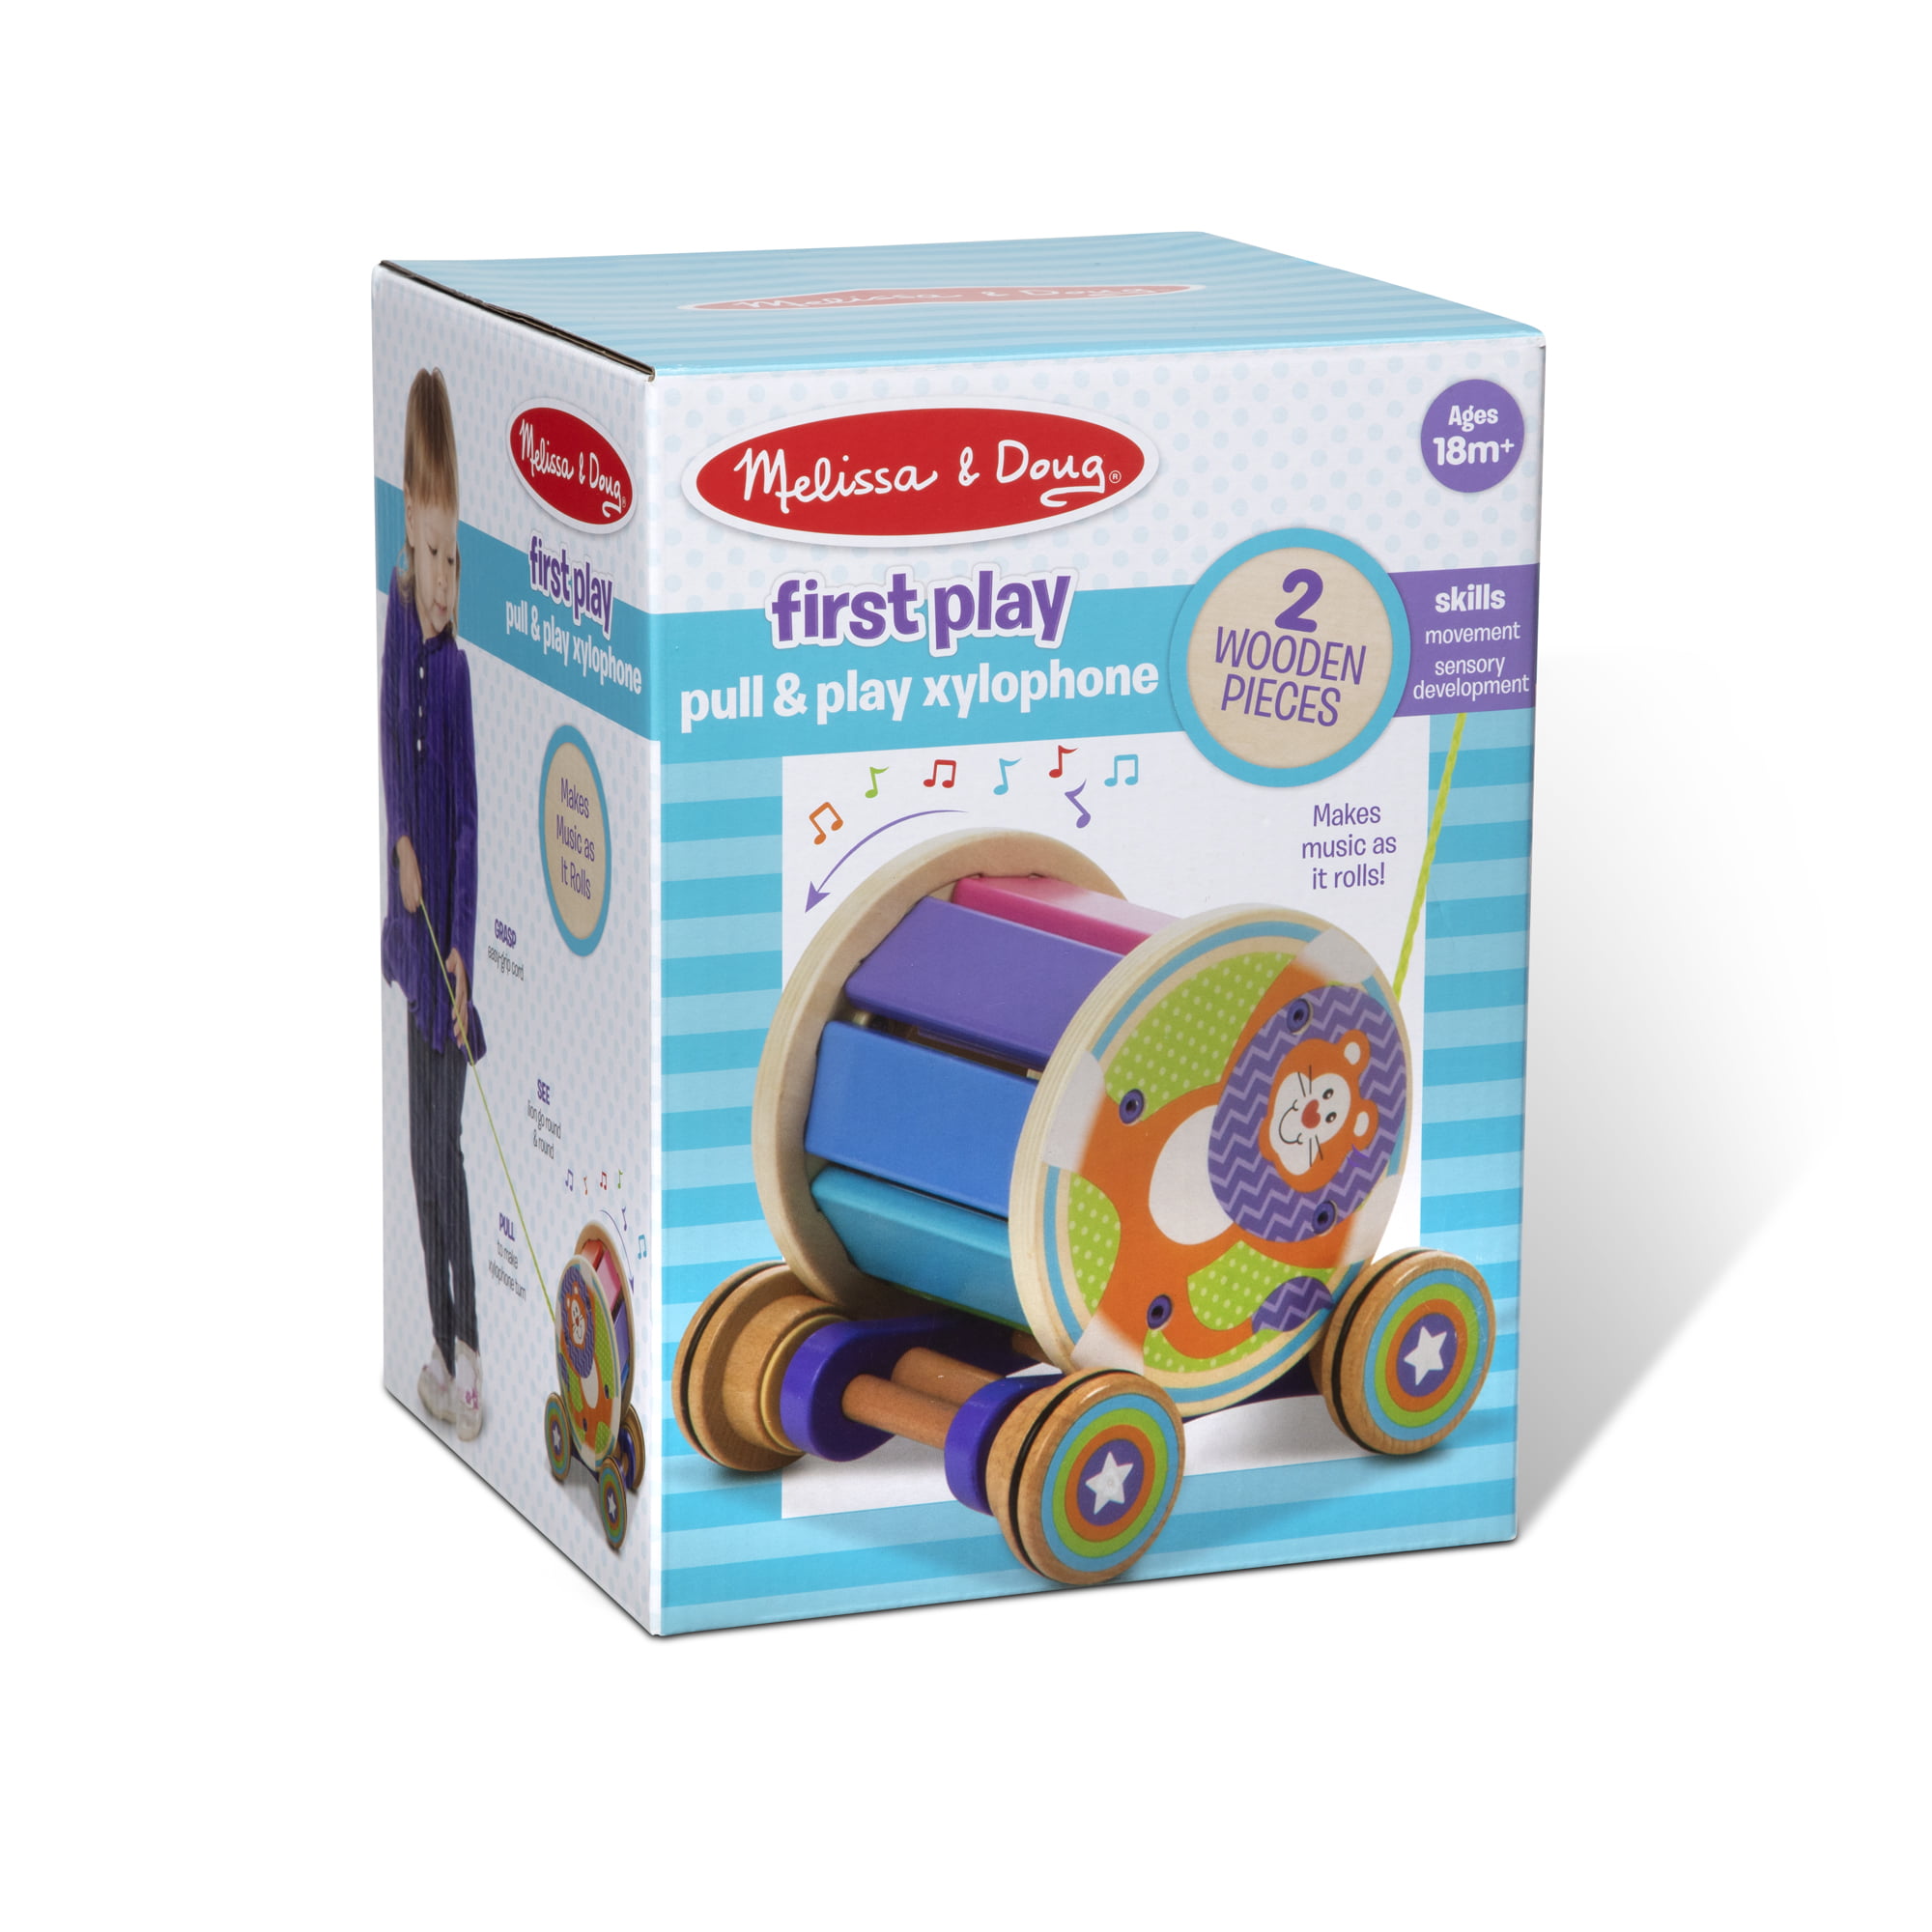 13012 NEW! Melissa and Doug First Play Pull & Play Xylophone 